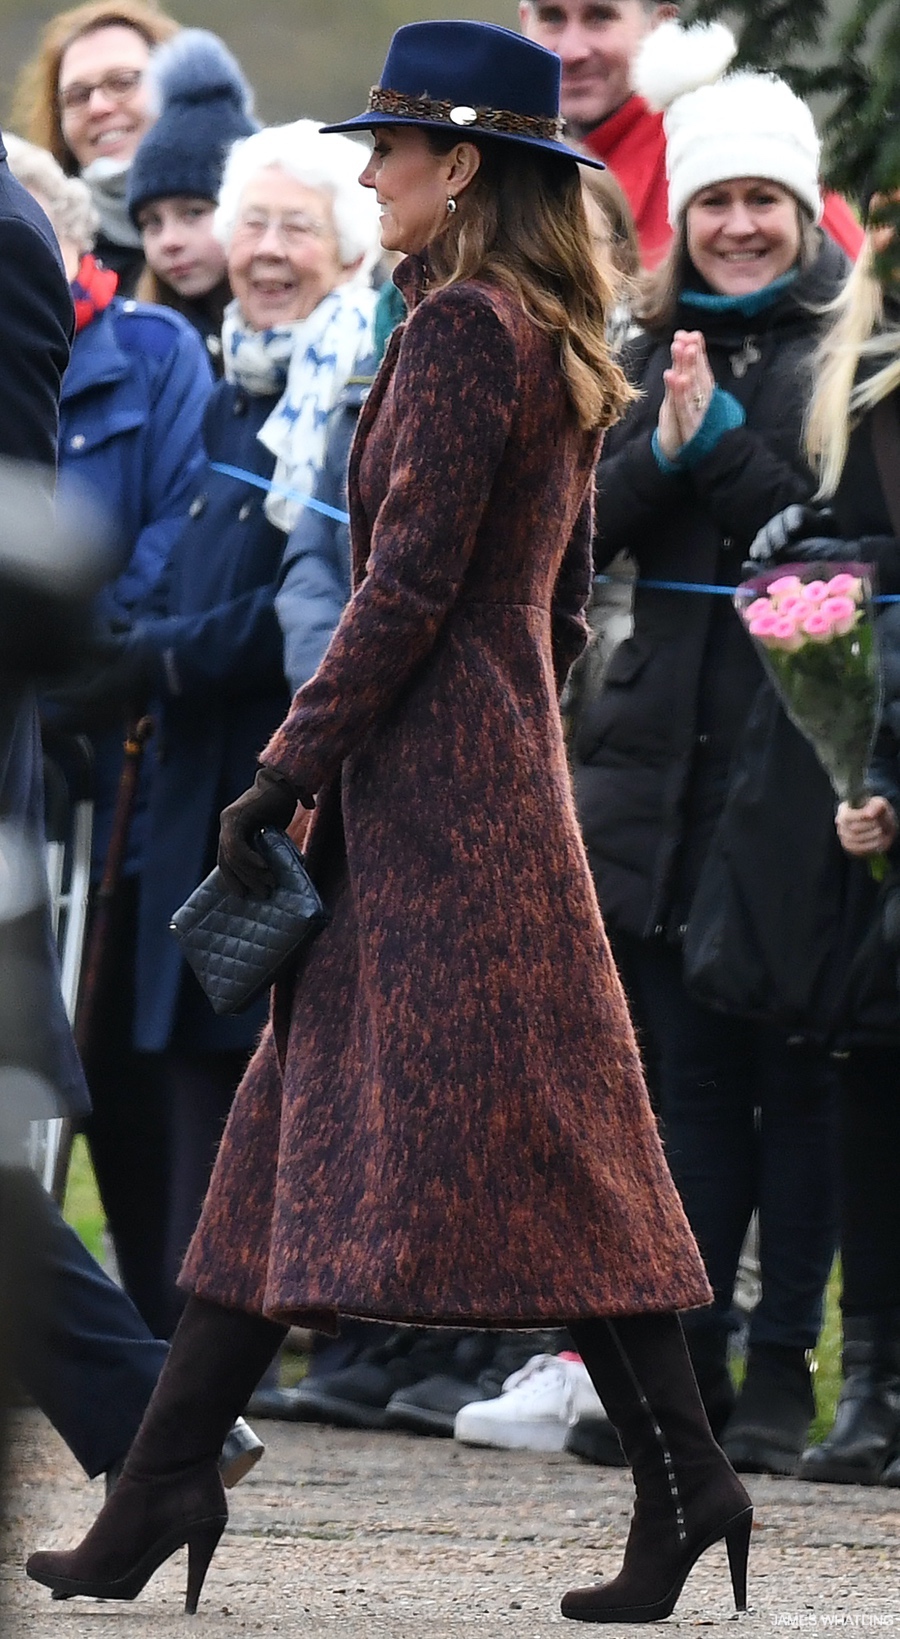 Kate Middleton walking, she wears a pair of brown suede boots.  They're the Stuart Weitzman Zipkin style.